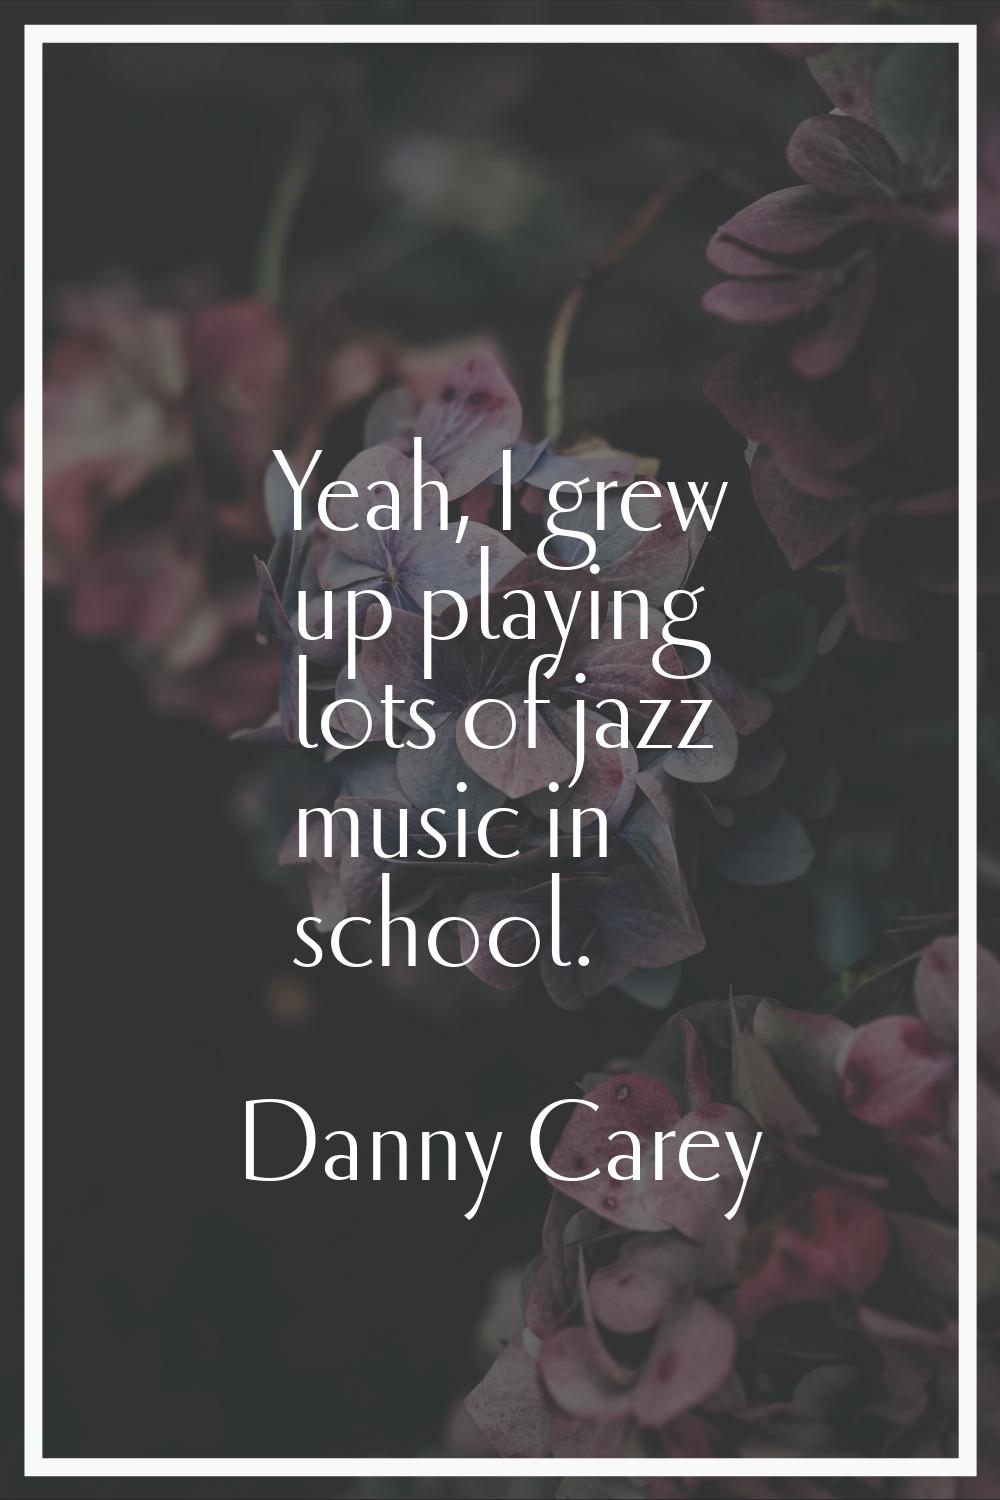 Yeah, I grew up playing lots of jazz music in school.